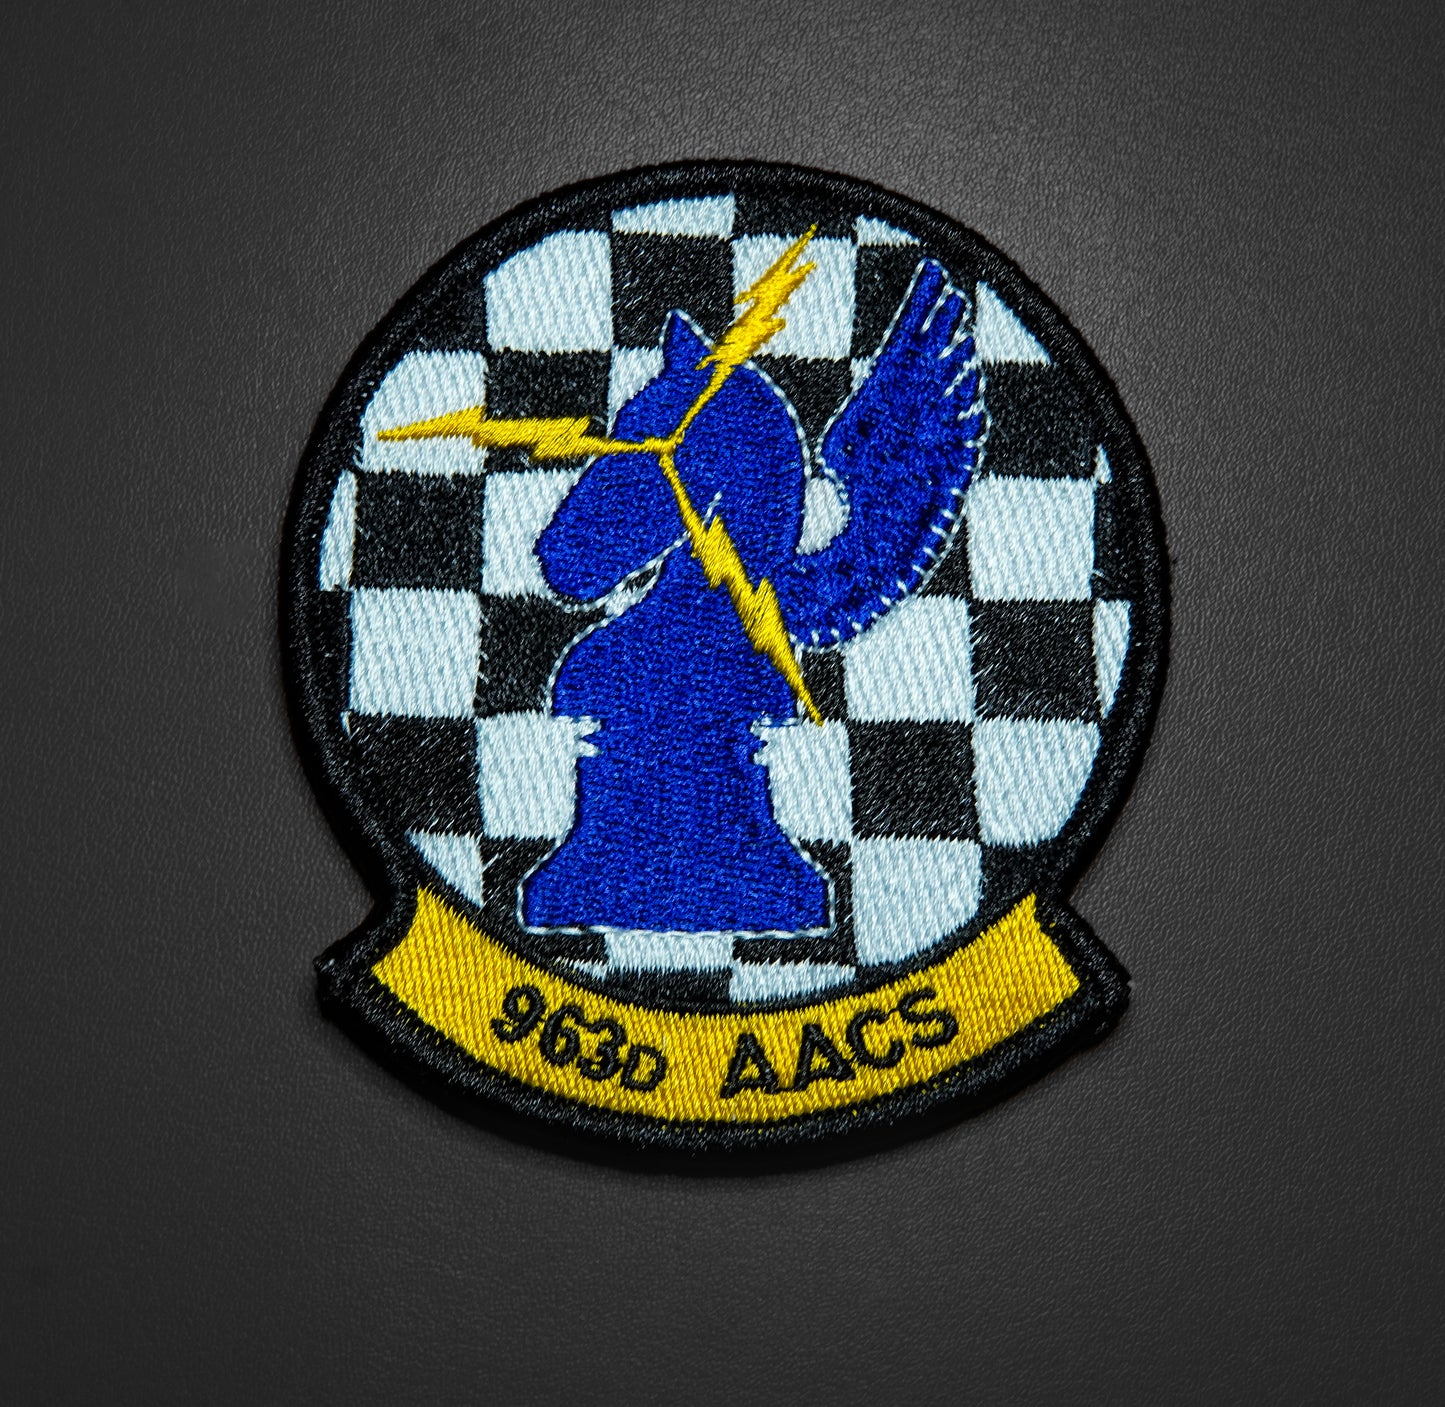 963rd AACS Patch